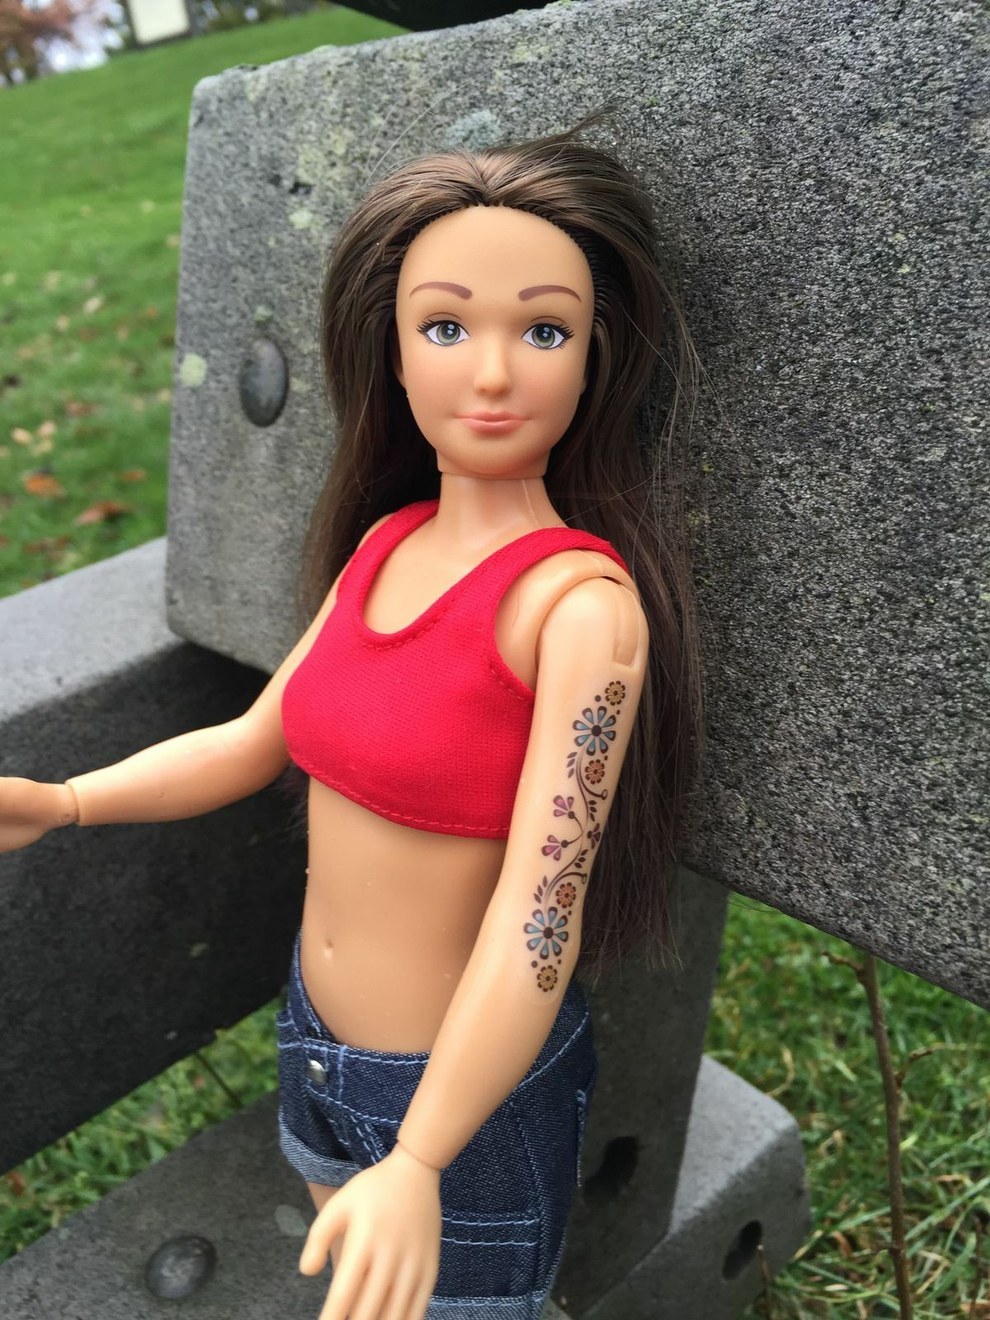 sommerfugl Installation kandidatskole This "Normal Barbie" Comes With Cellulite, Stretch Marks, Acne, And Tattoos